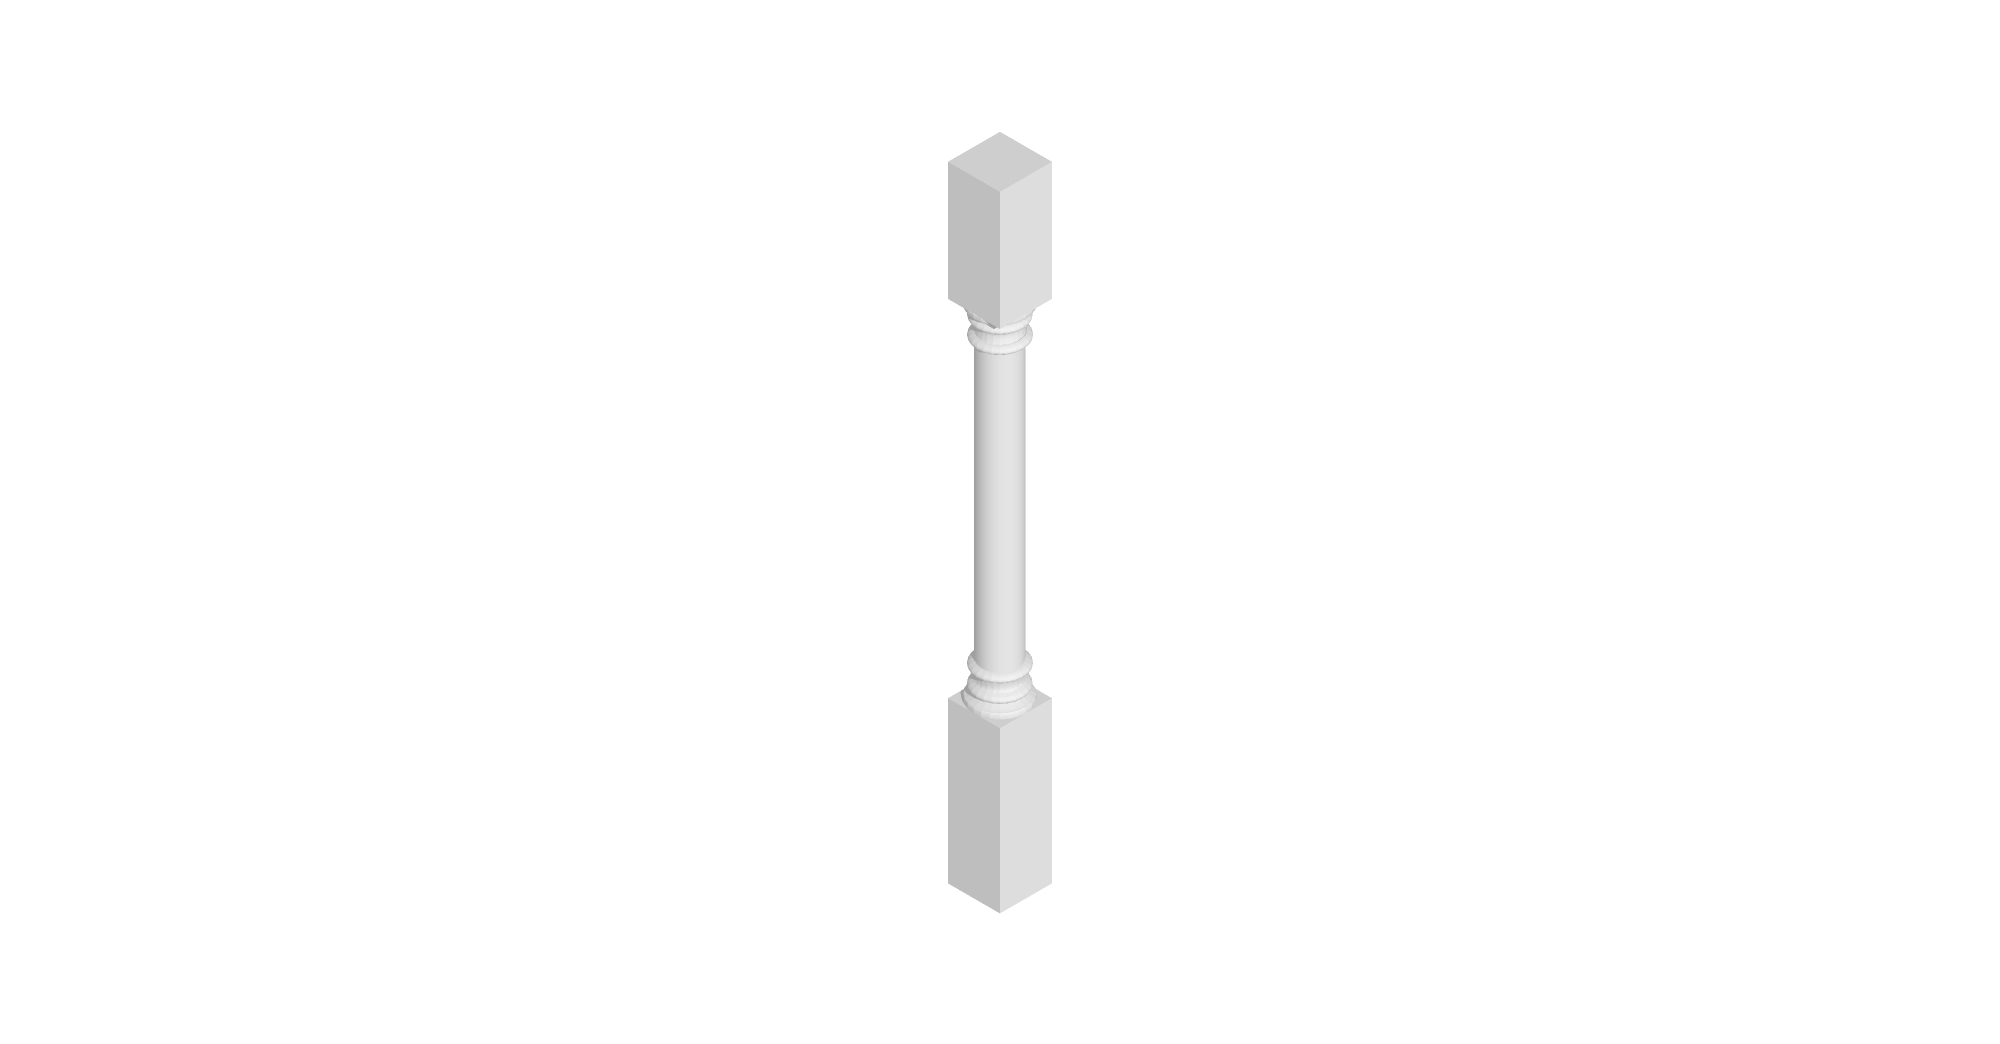 Benchpost Pilaster 900 X 75 X 75 - Madison Porcelain